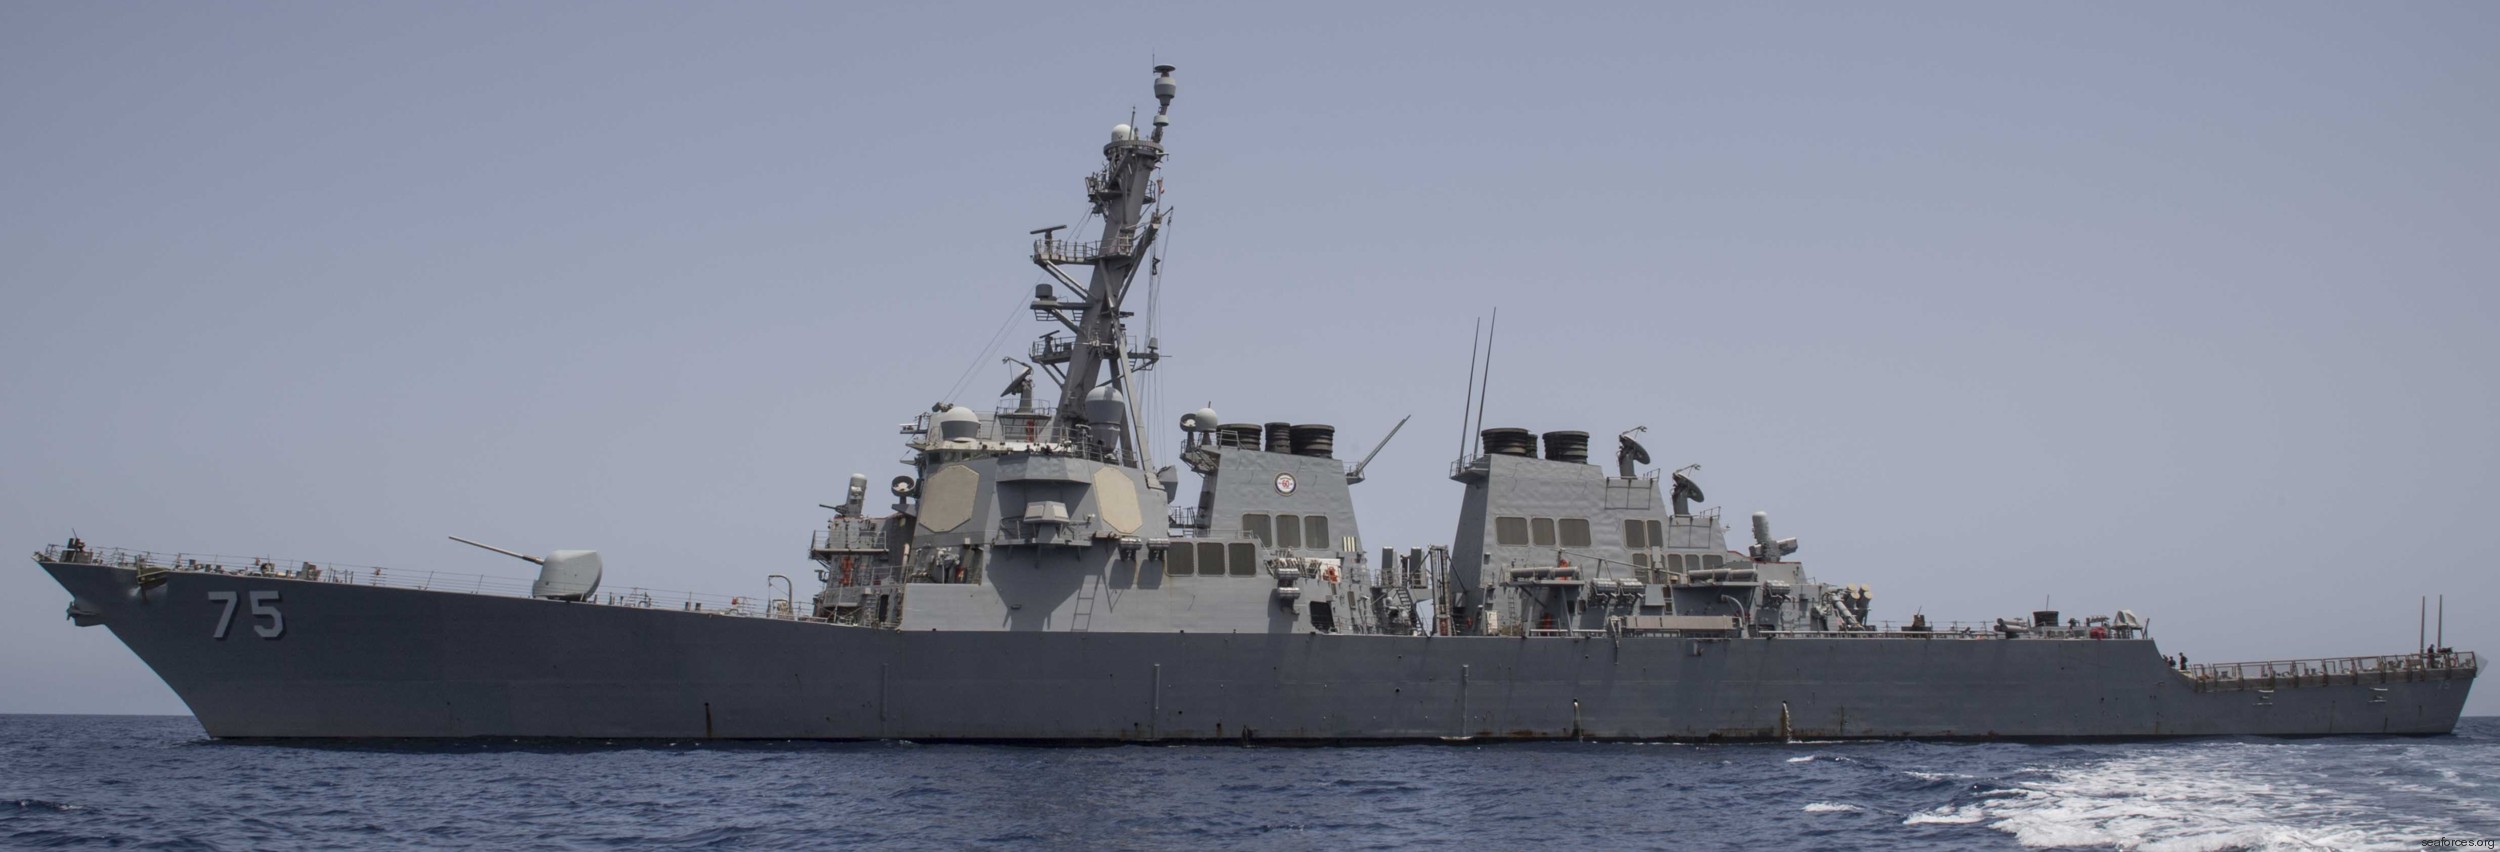 ddg-75 uss donald cook guided missile destroyer arleigh burke class aegis 169